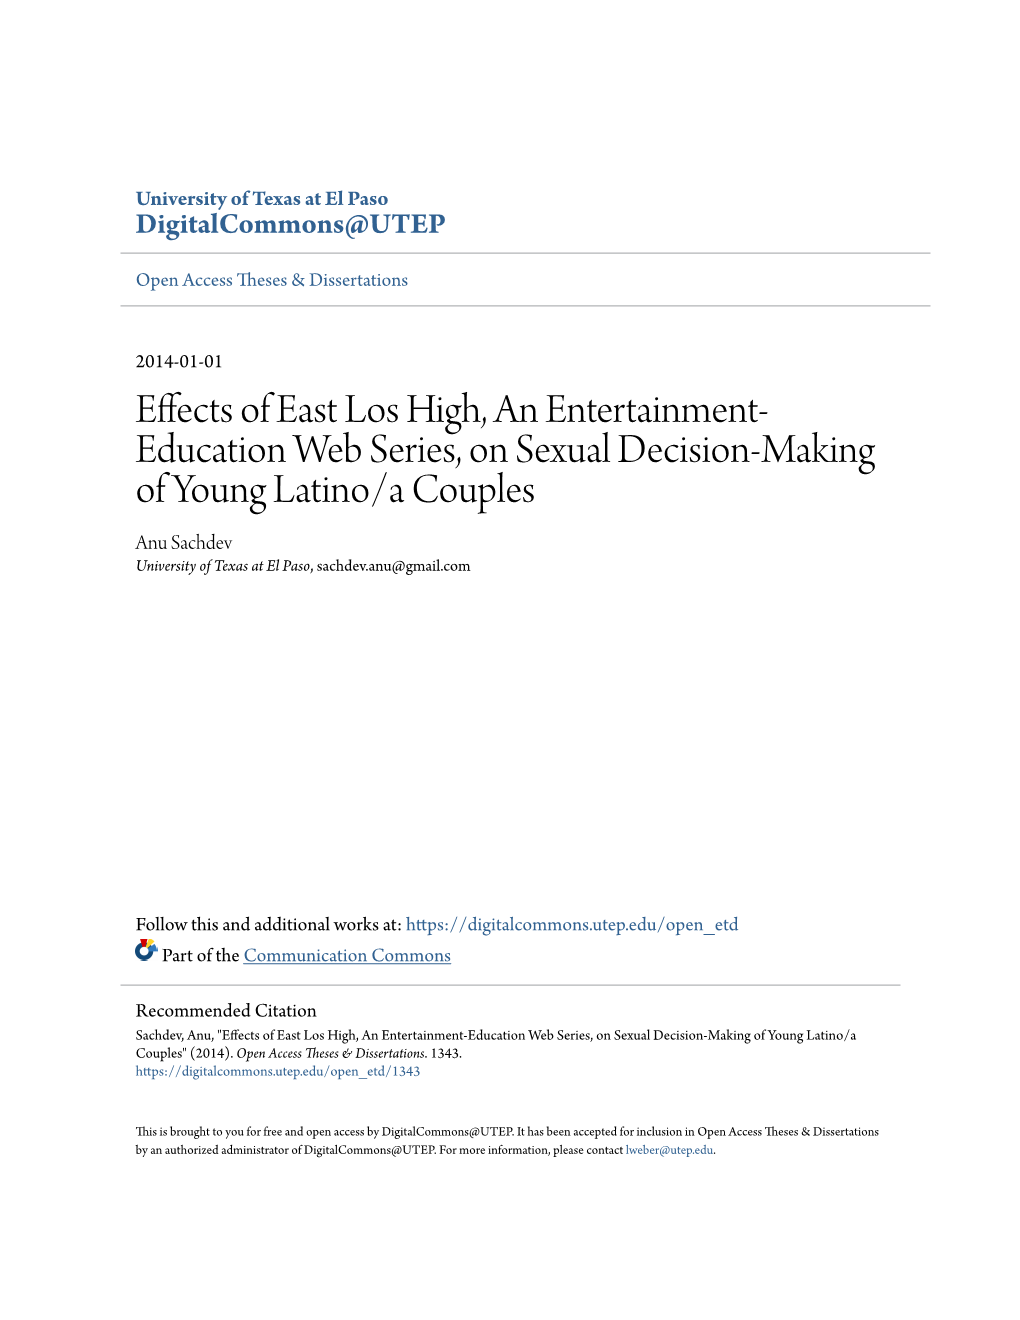 Effects of East Los High, an Entertainment-Education Web Series, on Sexual Decision-Making of Young Latino/A Couples" (2014)